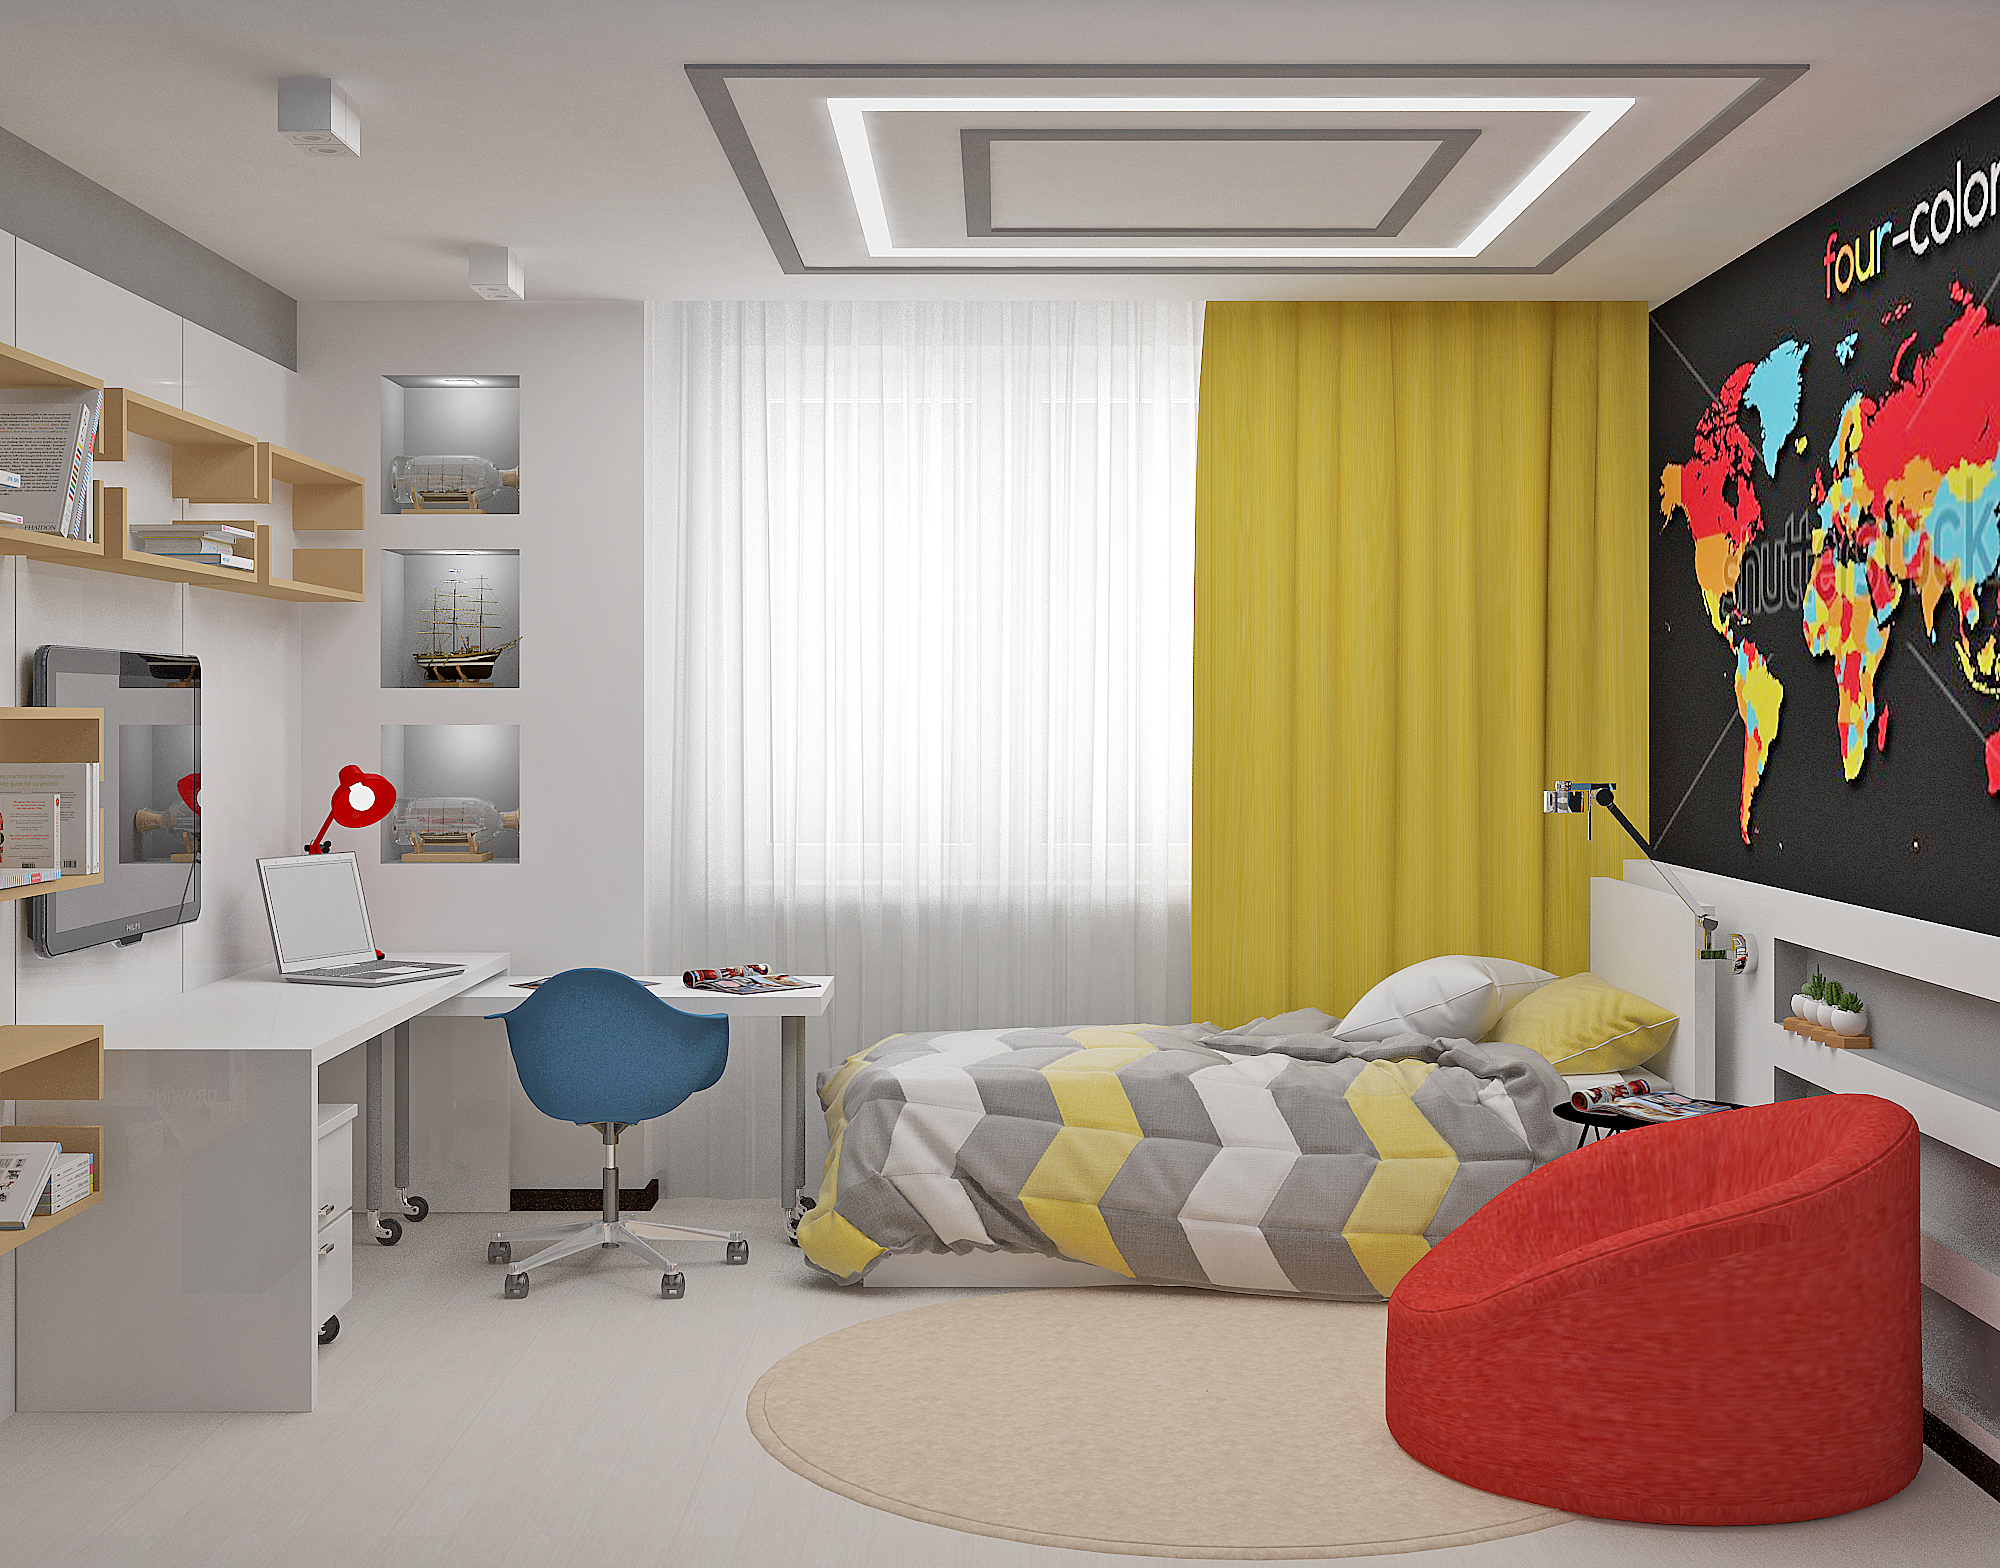 An example of a bright modern decor of a children's room